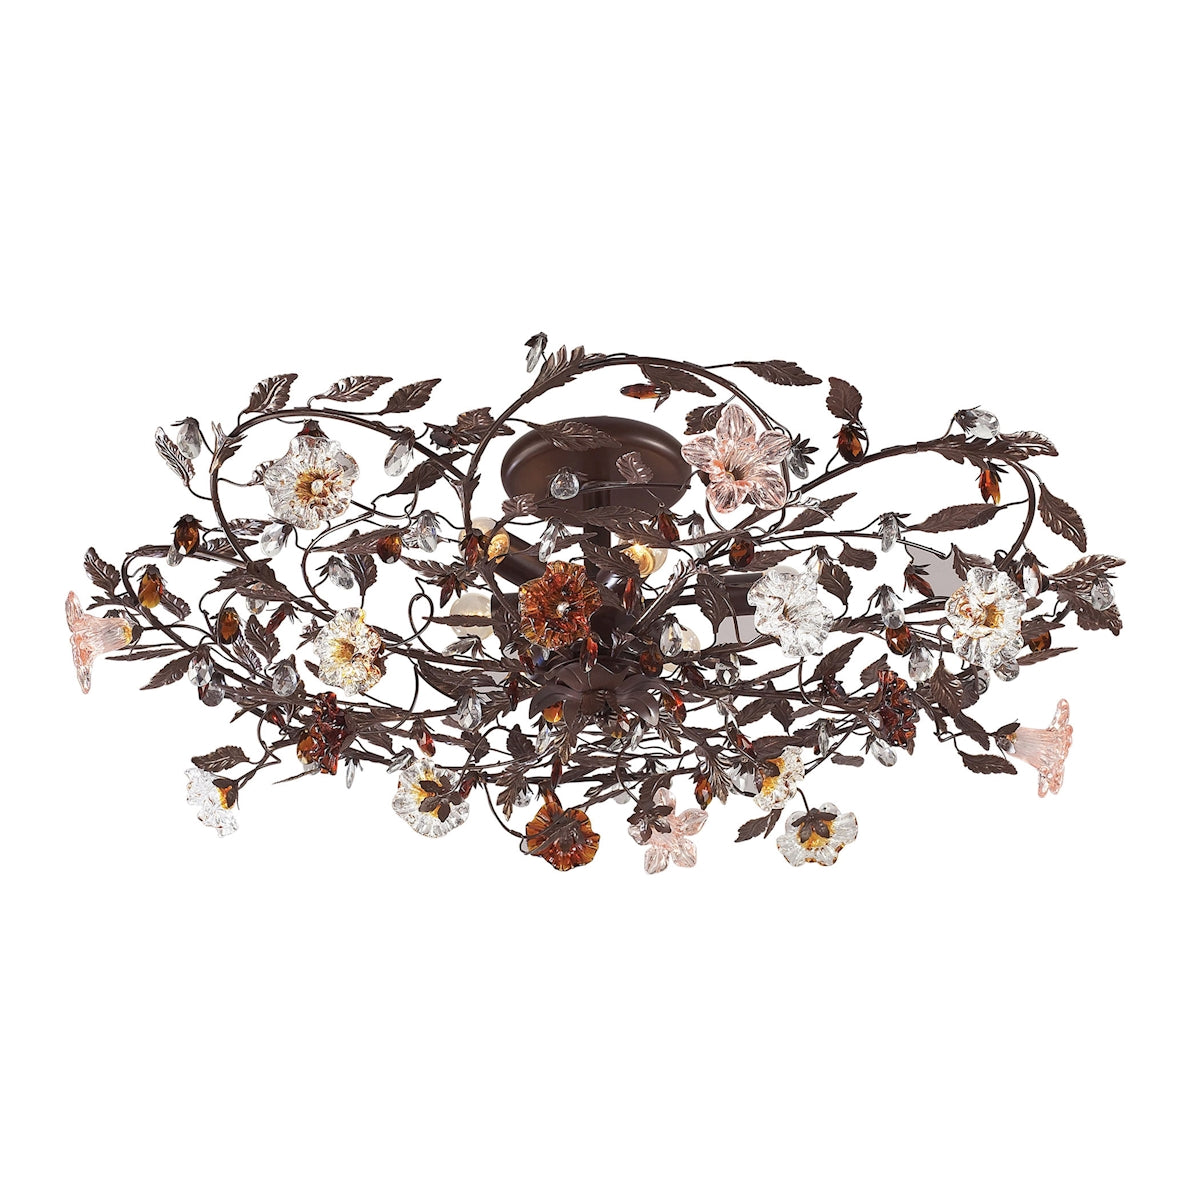 ELK Lighting 7047/6 Cristallo Fiore 6-Light Flush Mount in Deep Rust with Clear and Amber Florets